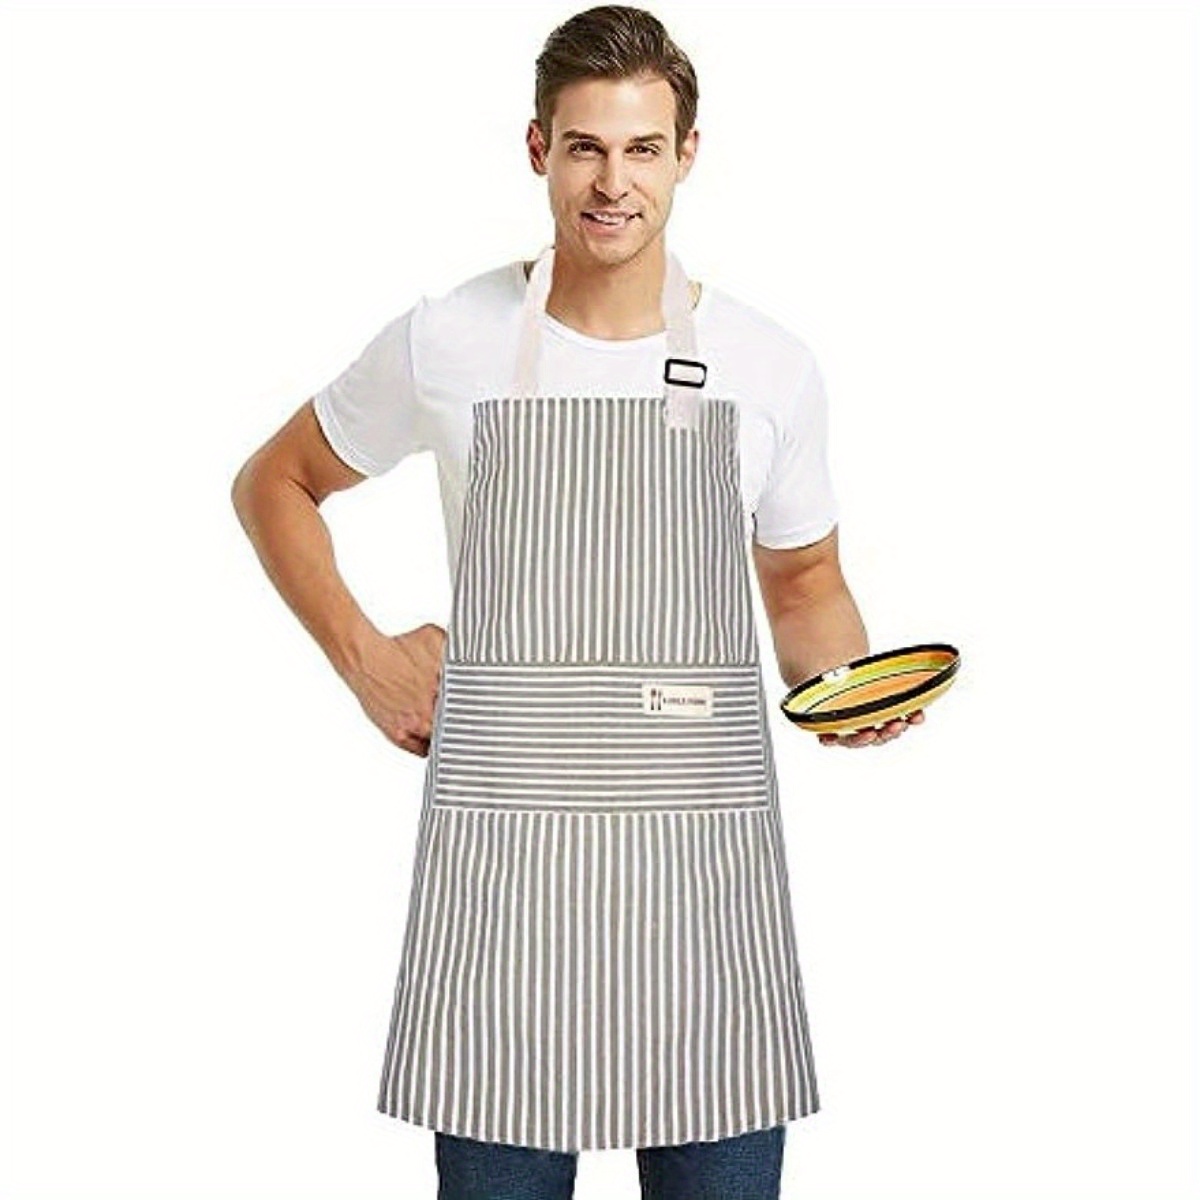 1pc apron 2 pack kitchen cooking aprons adjustable bib chef apron with 2 pockets for home cleaning kitchen cooking baking gardening